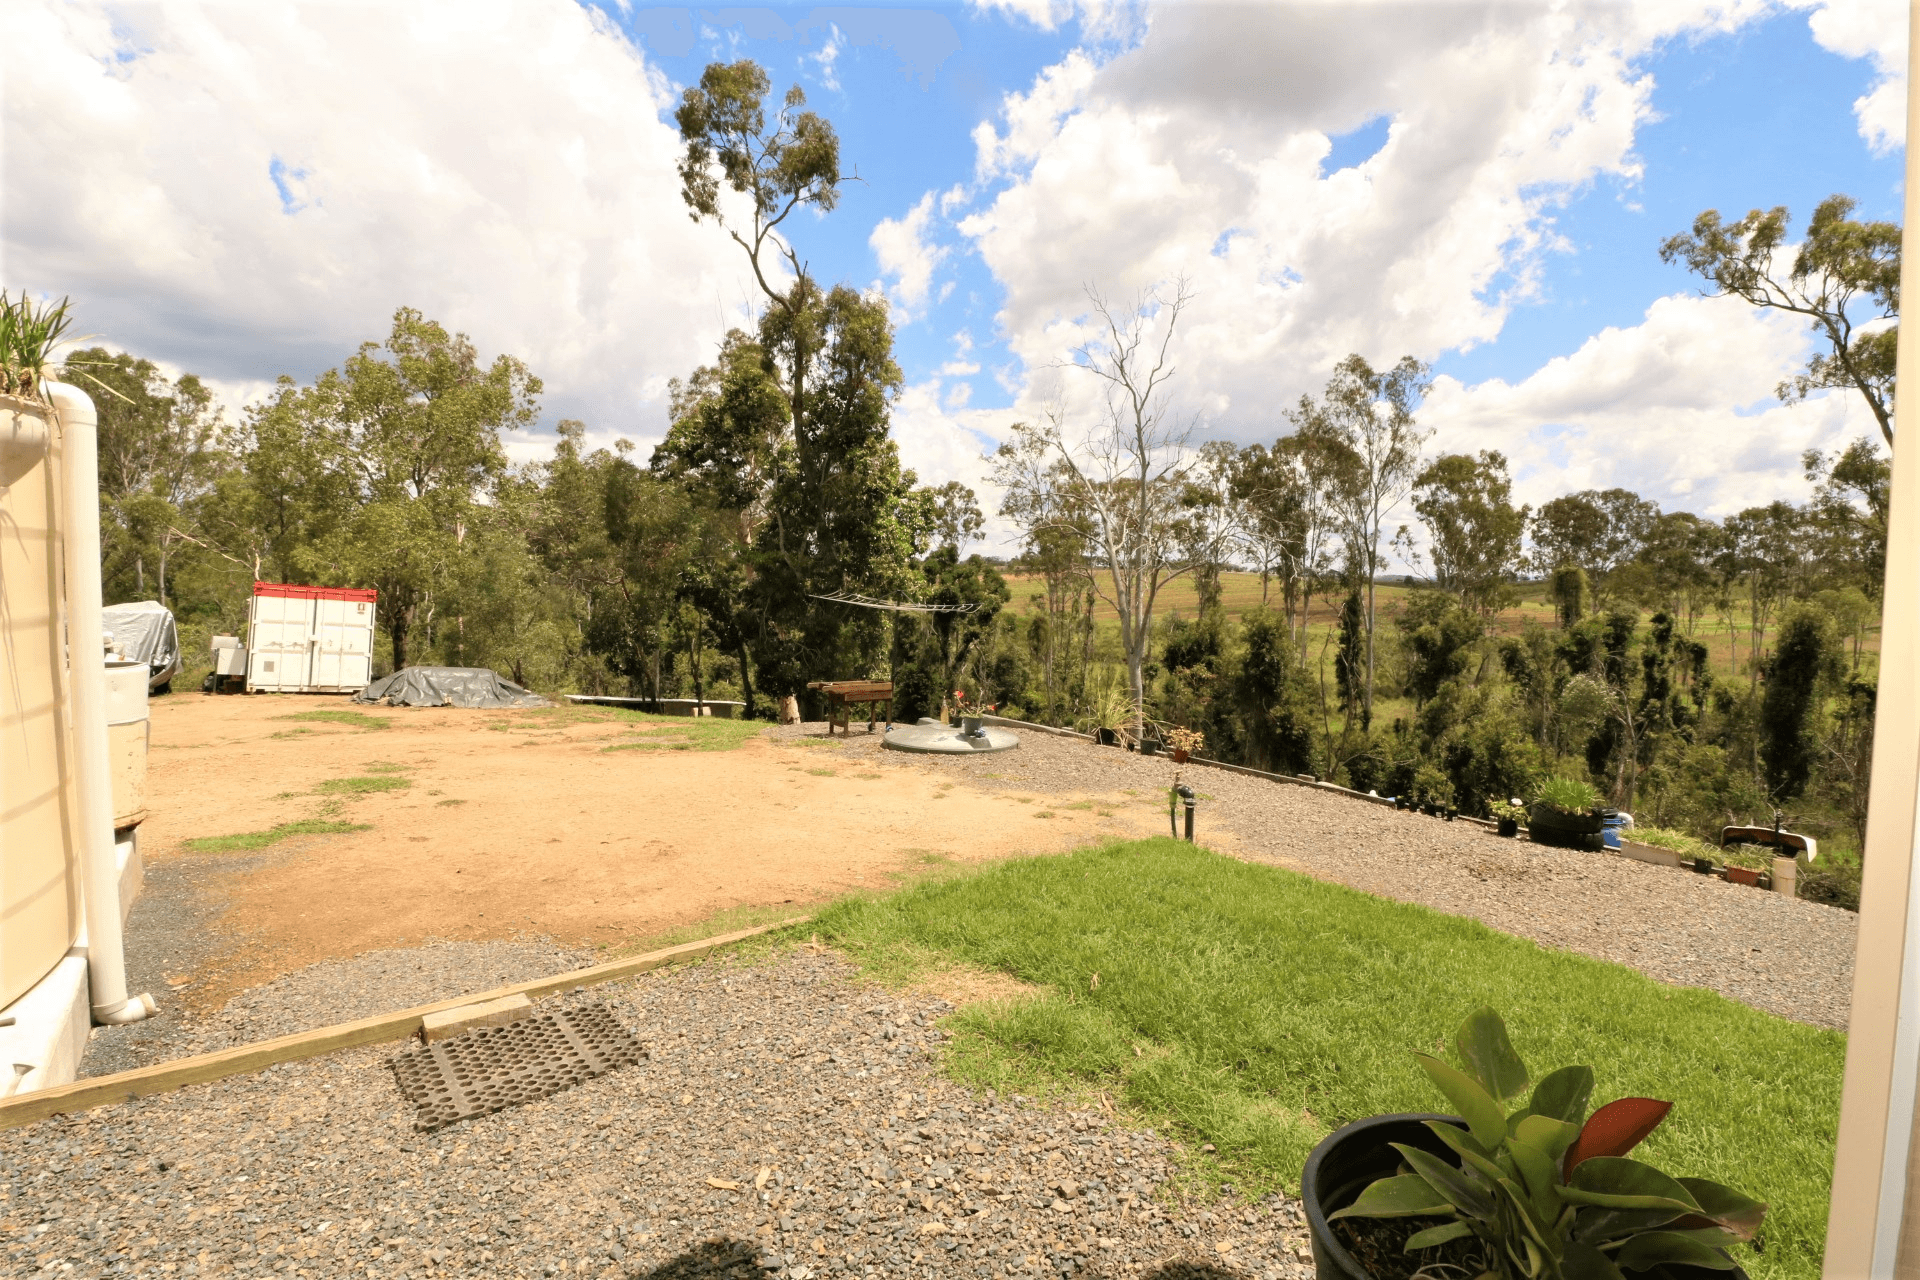 5-7 Madle Court, Booyal, QLD 4671